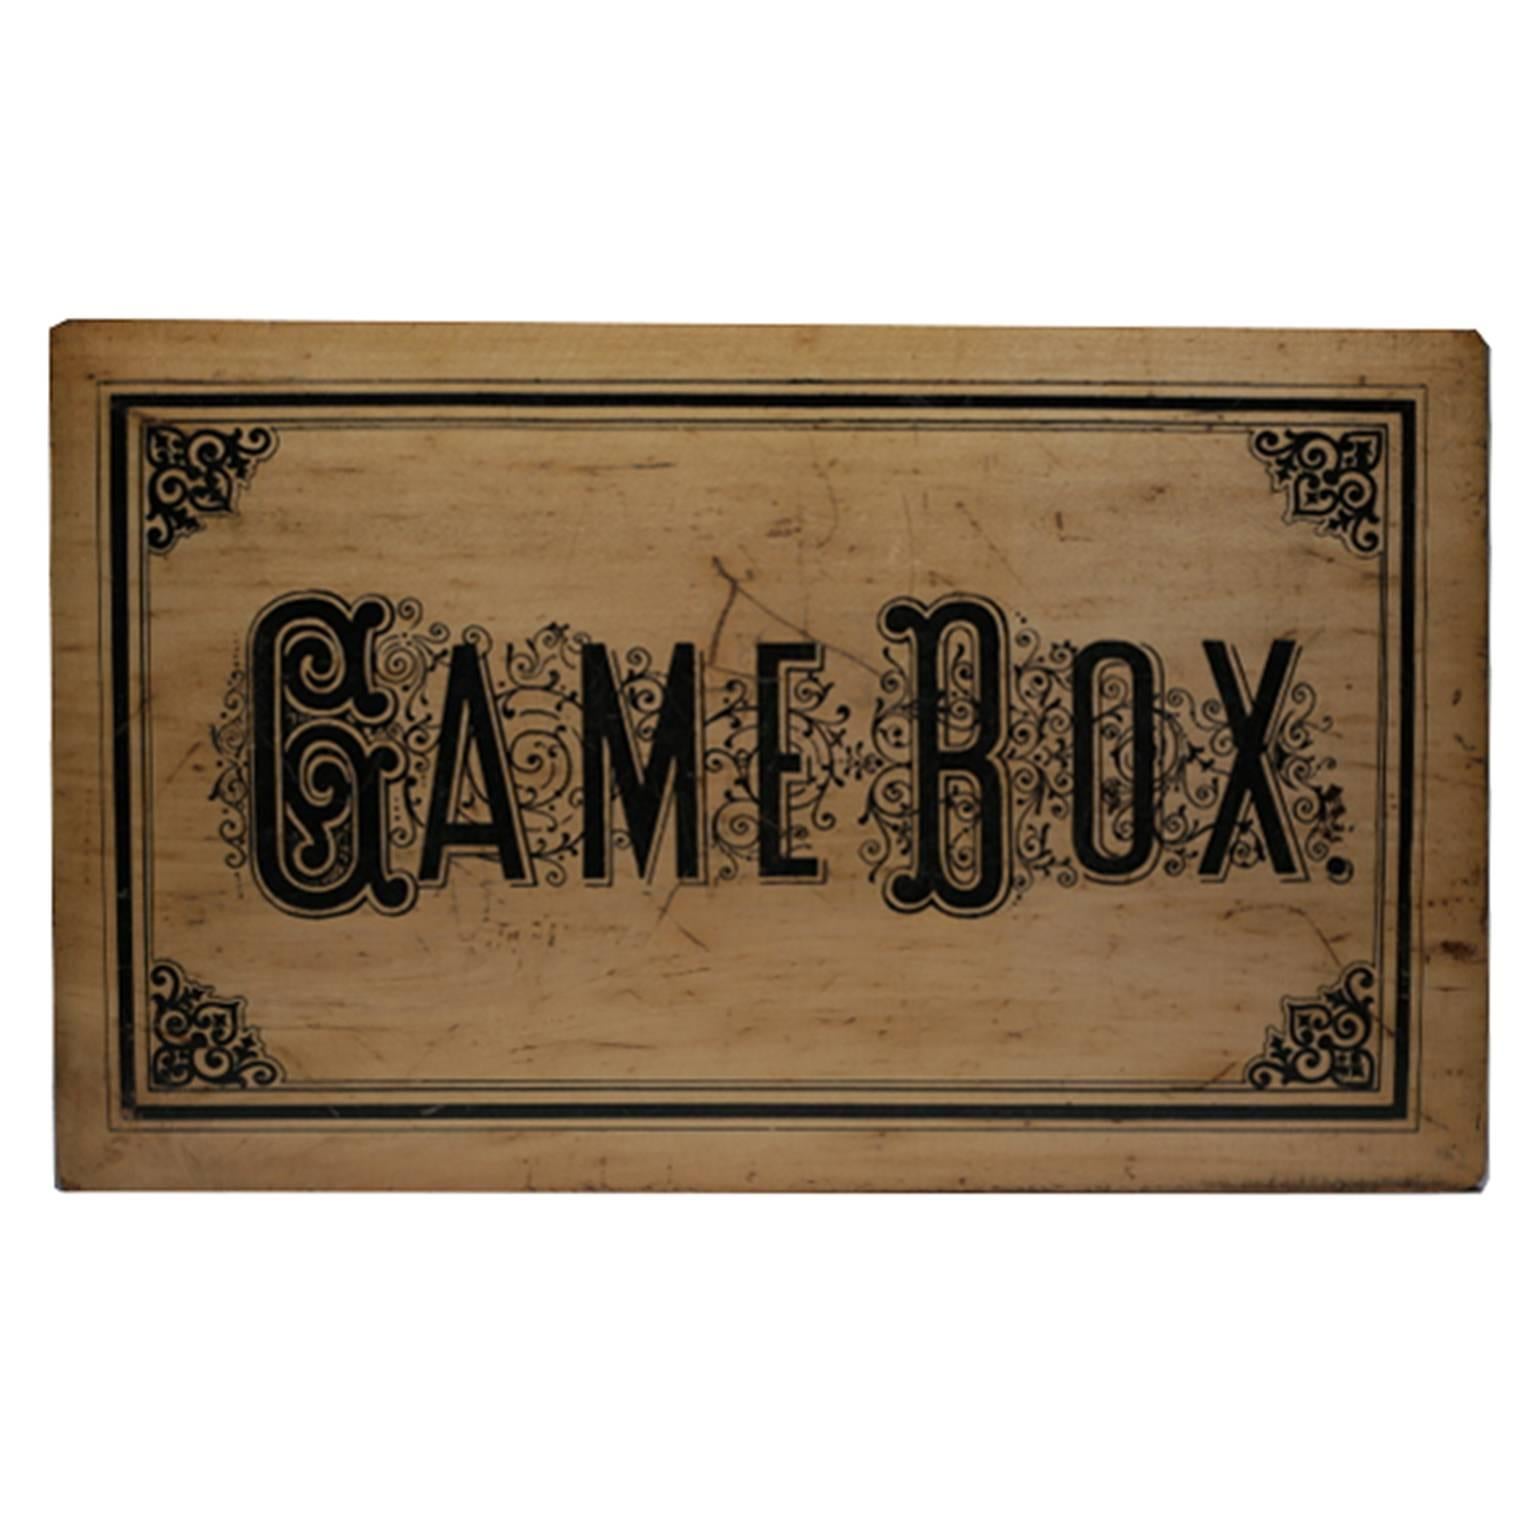 Beautiful game box containing several games. All complete sets with a double game board, lotto cards, two wooden dice cupes and four dice made of bone, circa 1900.